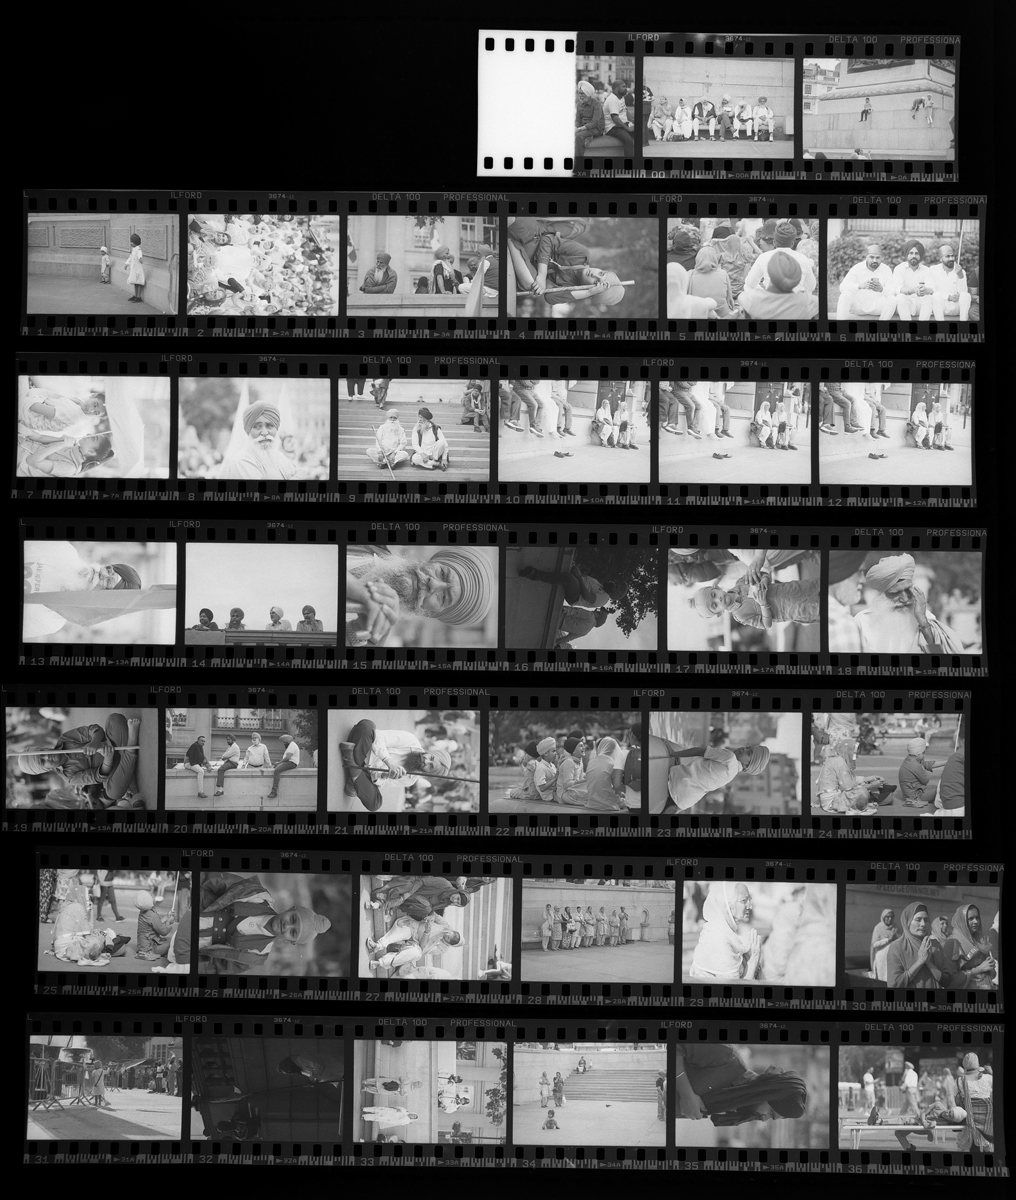 Contact sheet of black and white film image of Sikh remembrance day shot on ILFORD Delta 100 film by Simon King